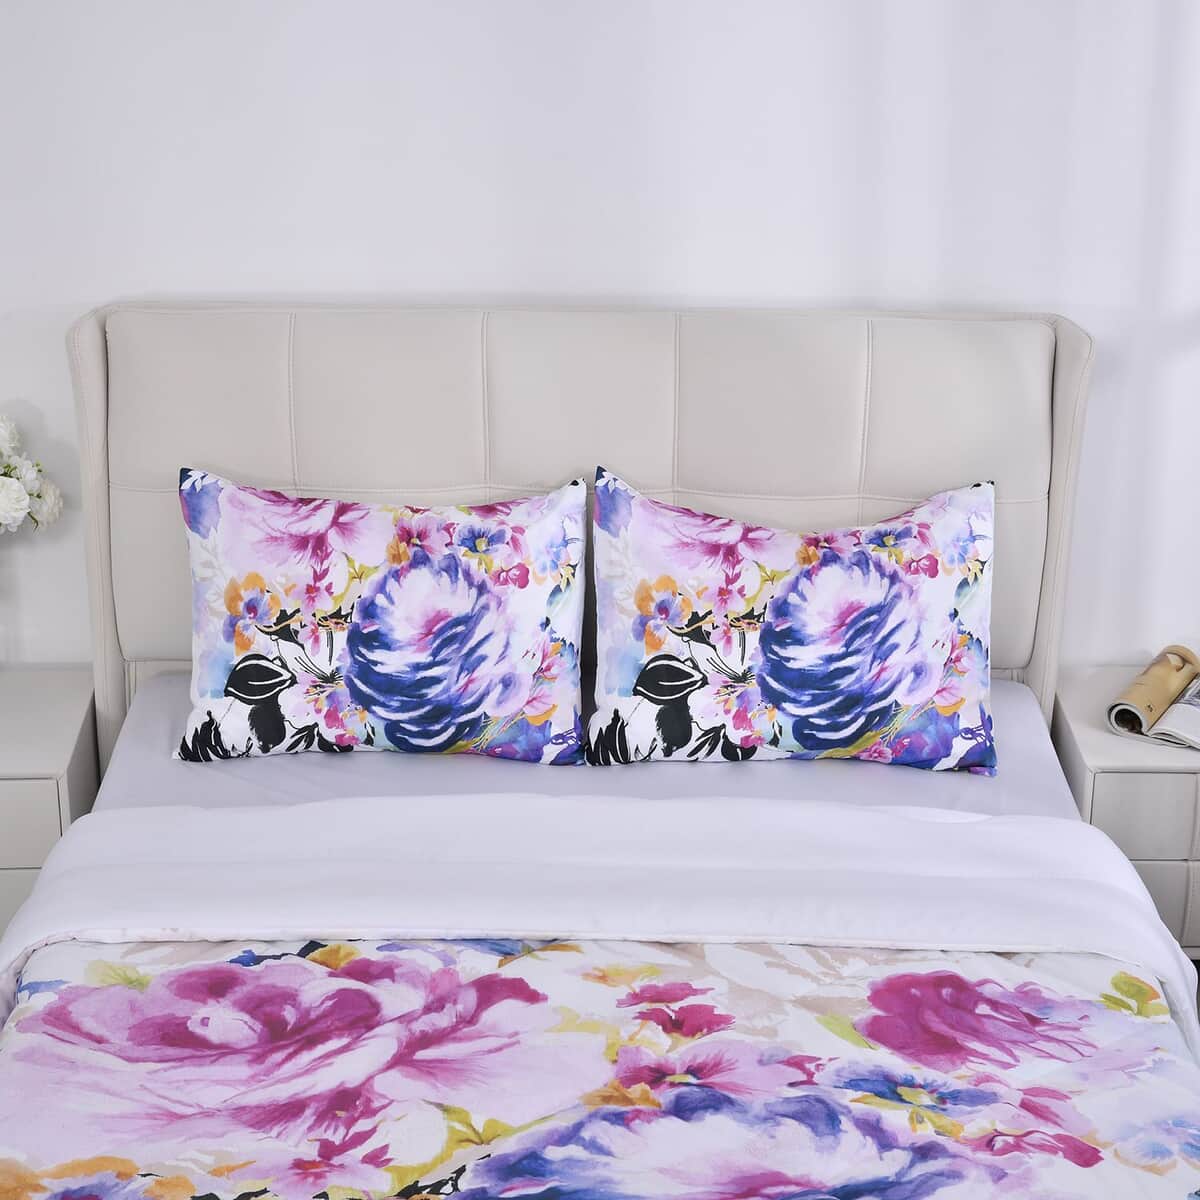 Homesmart Fuchsia Floral 3D Digital Print Pattern Microfiber Comforter and Pillow Cover - Queen, Best Comforter Sets, Bed Comforters, Comforter Set for Bedroom image number 3